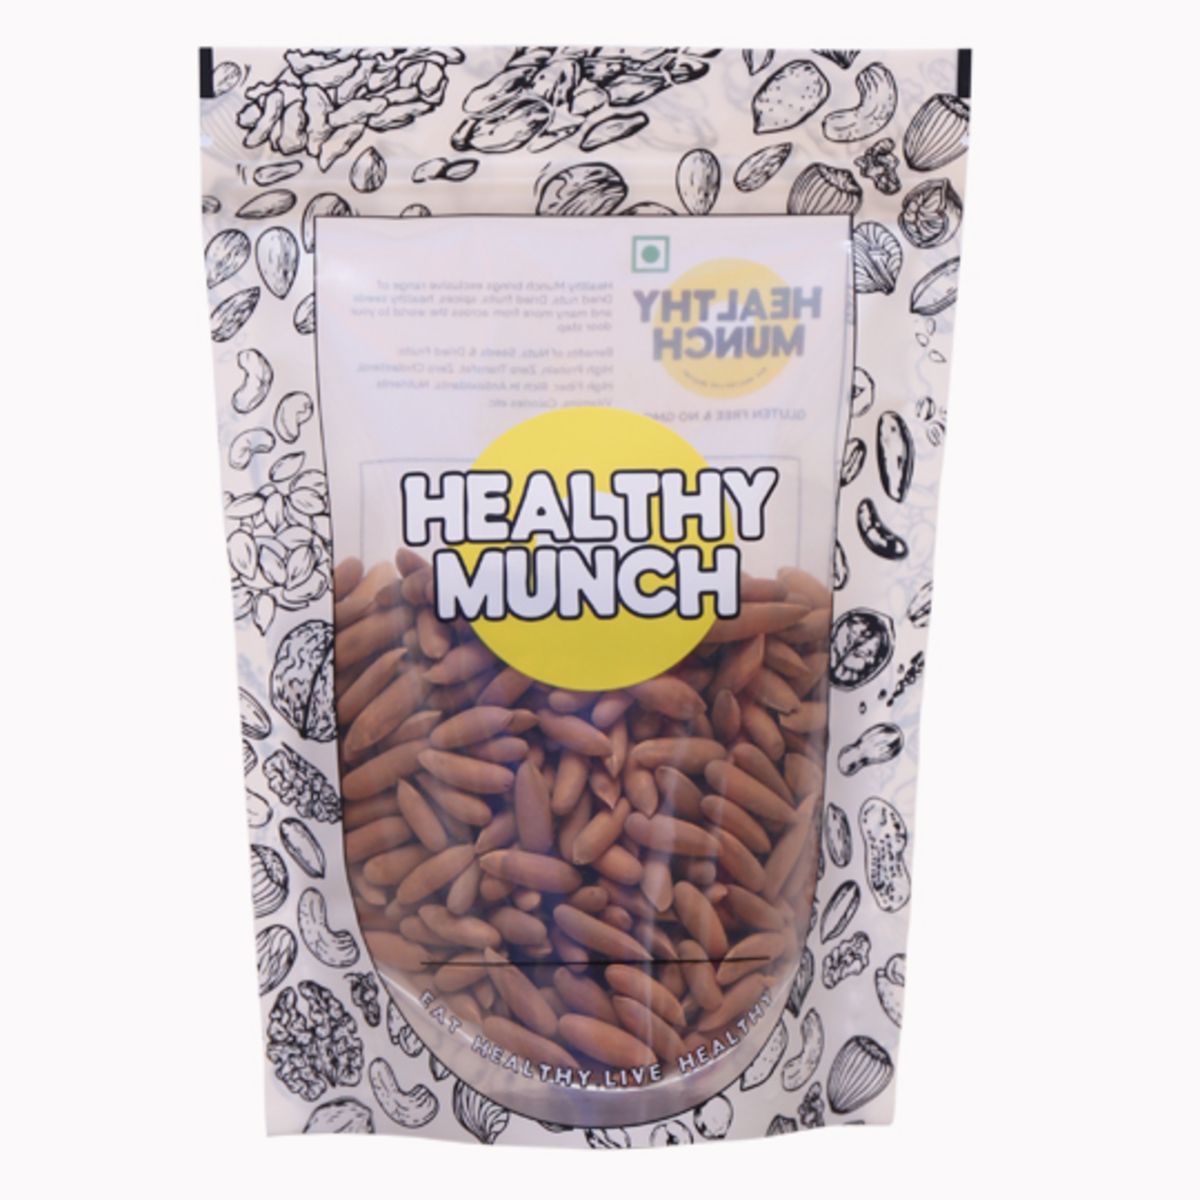 Buy Healthy Munch Himalayan Pine nuts 100 gms at Best Price Online